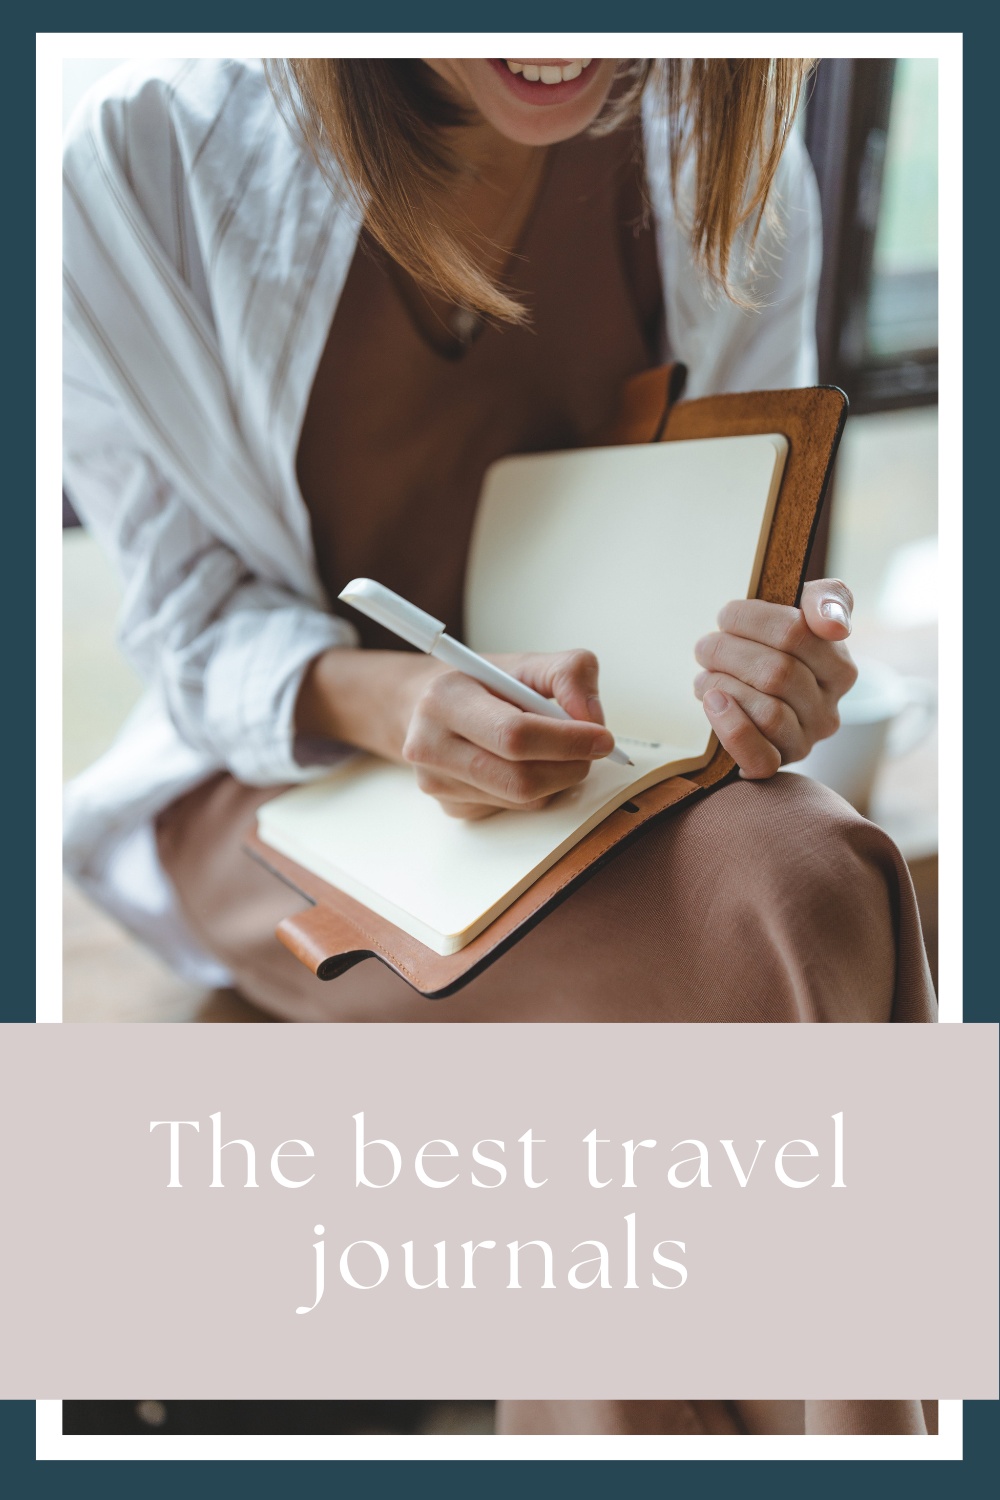 The best travel journals by My Next Pin